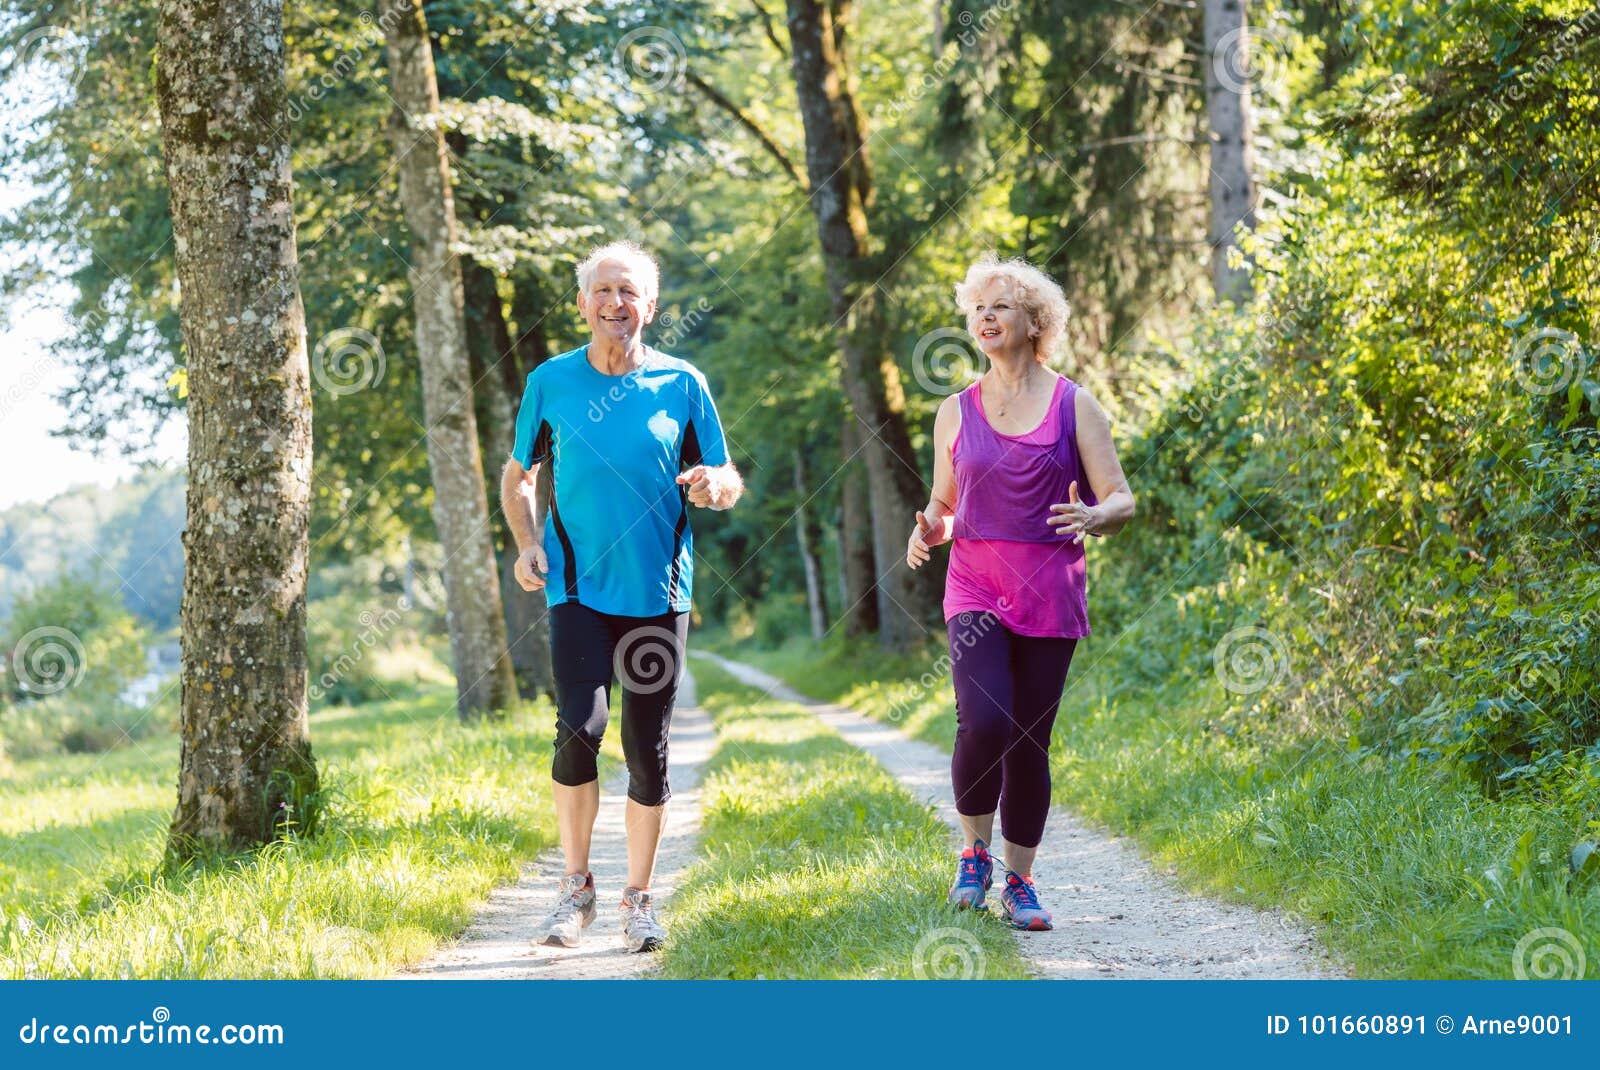 two active seniors with a healthy lifestyle smiling while joggin